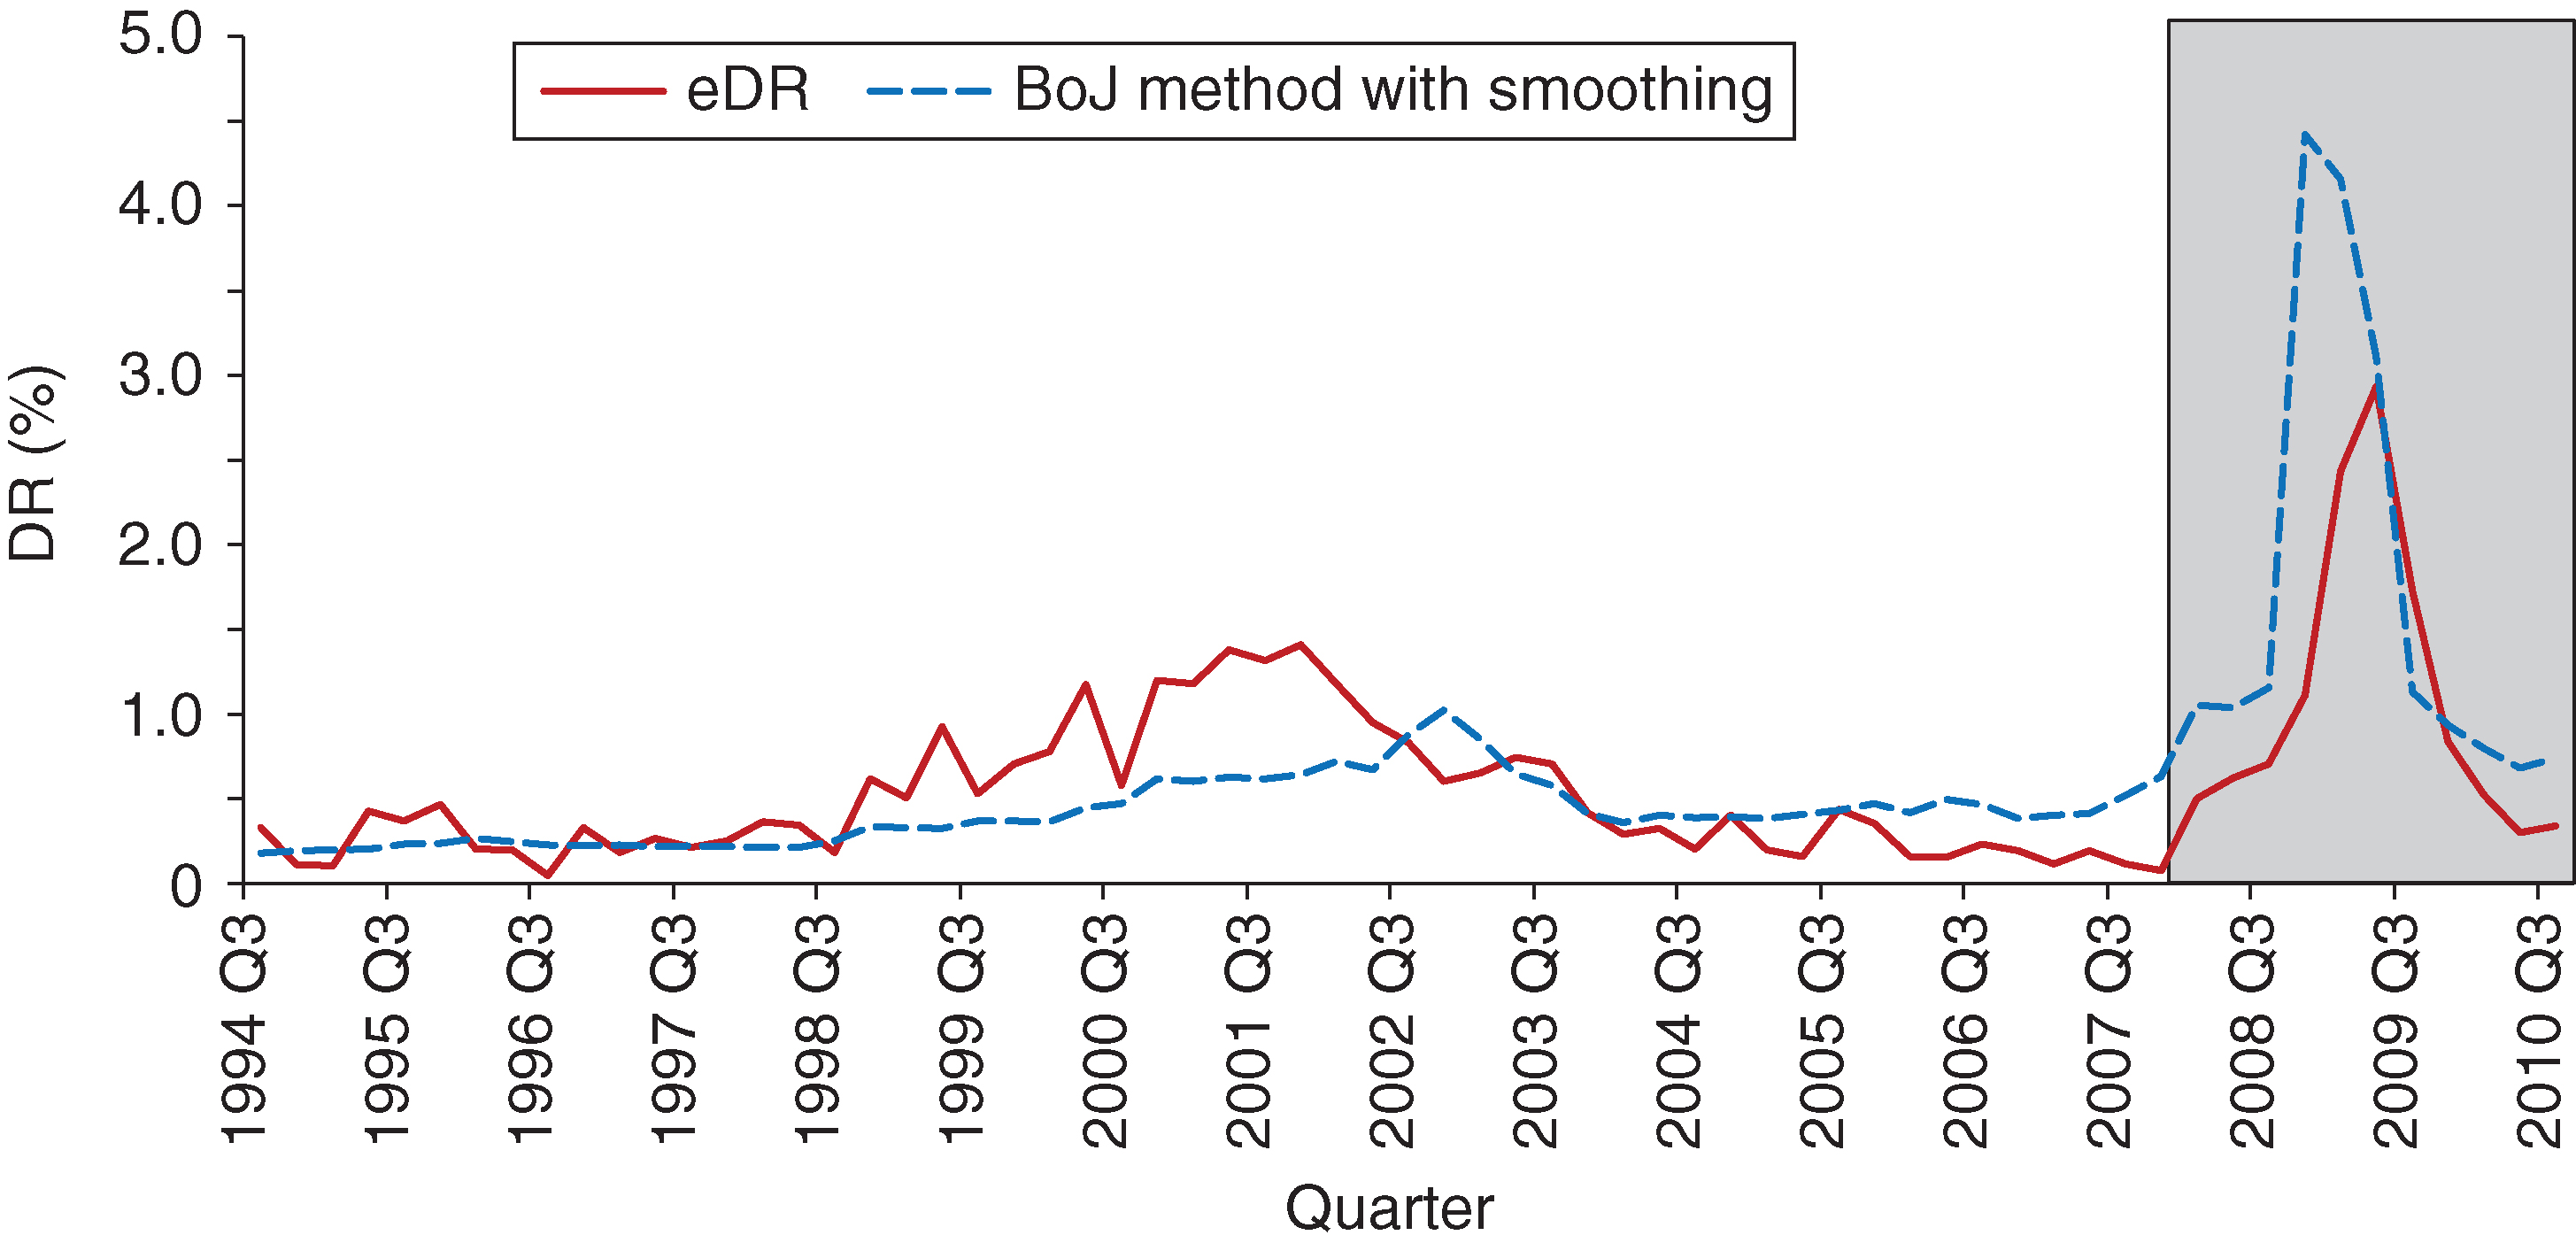 In-sample and out-of-sample model fit (Bank of Japan method, smoothing applied).